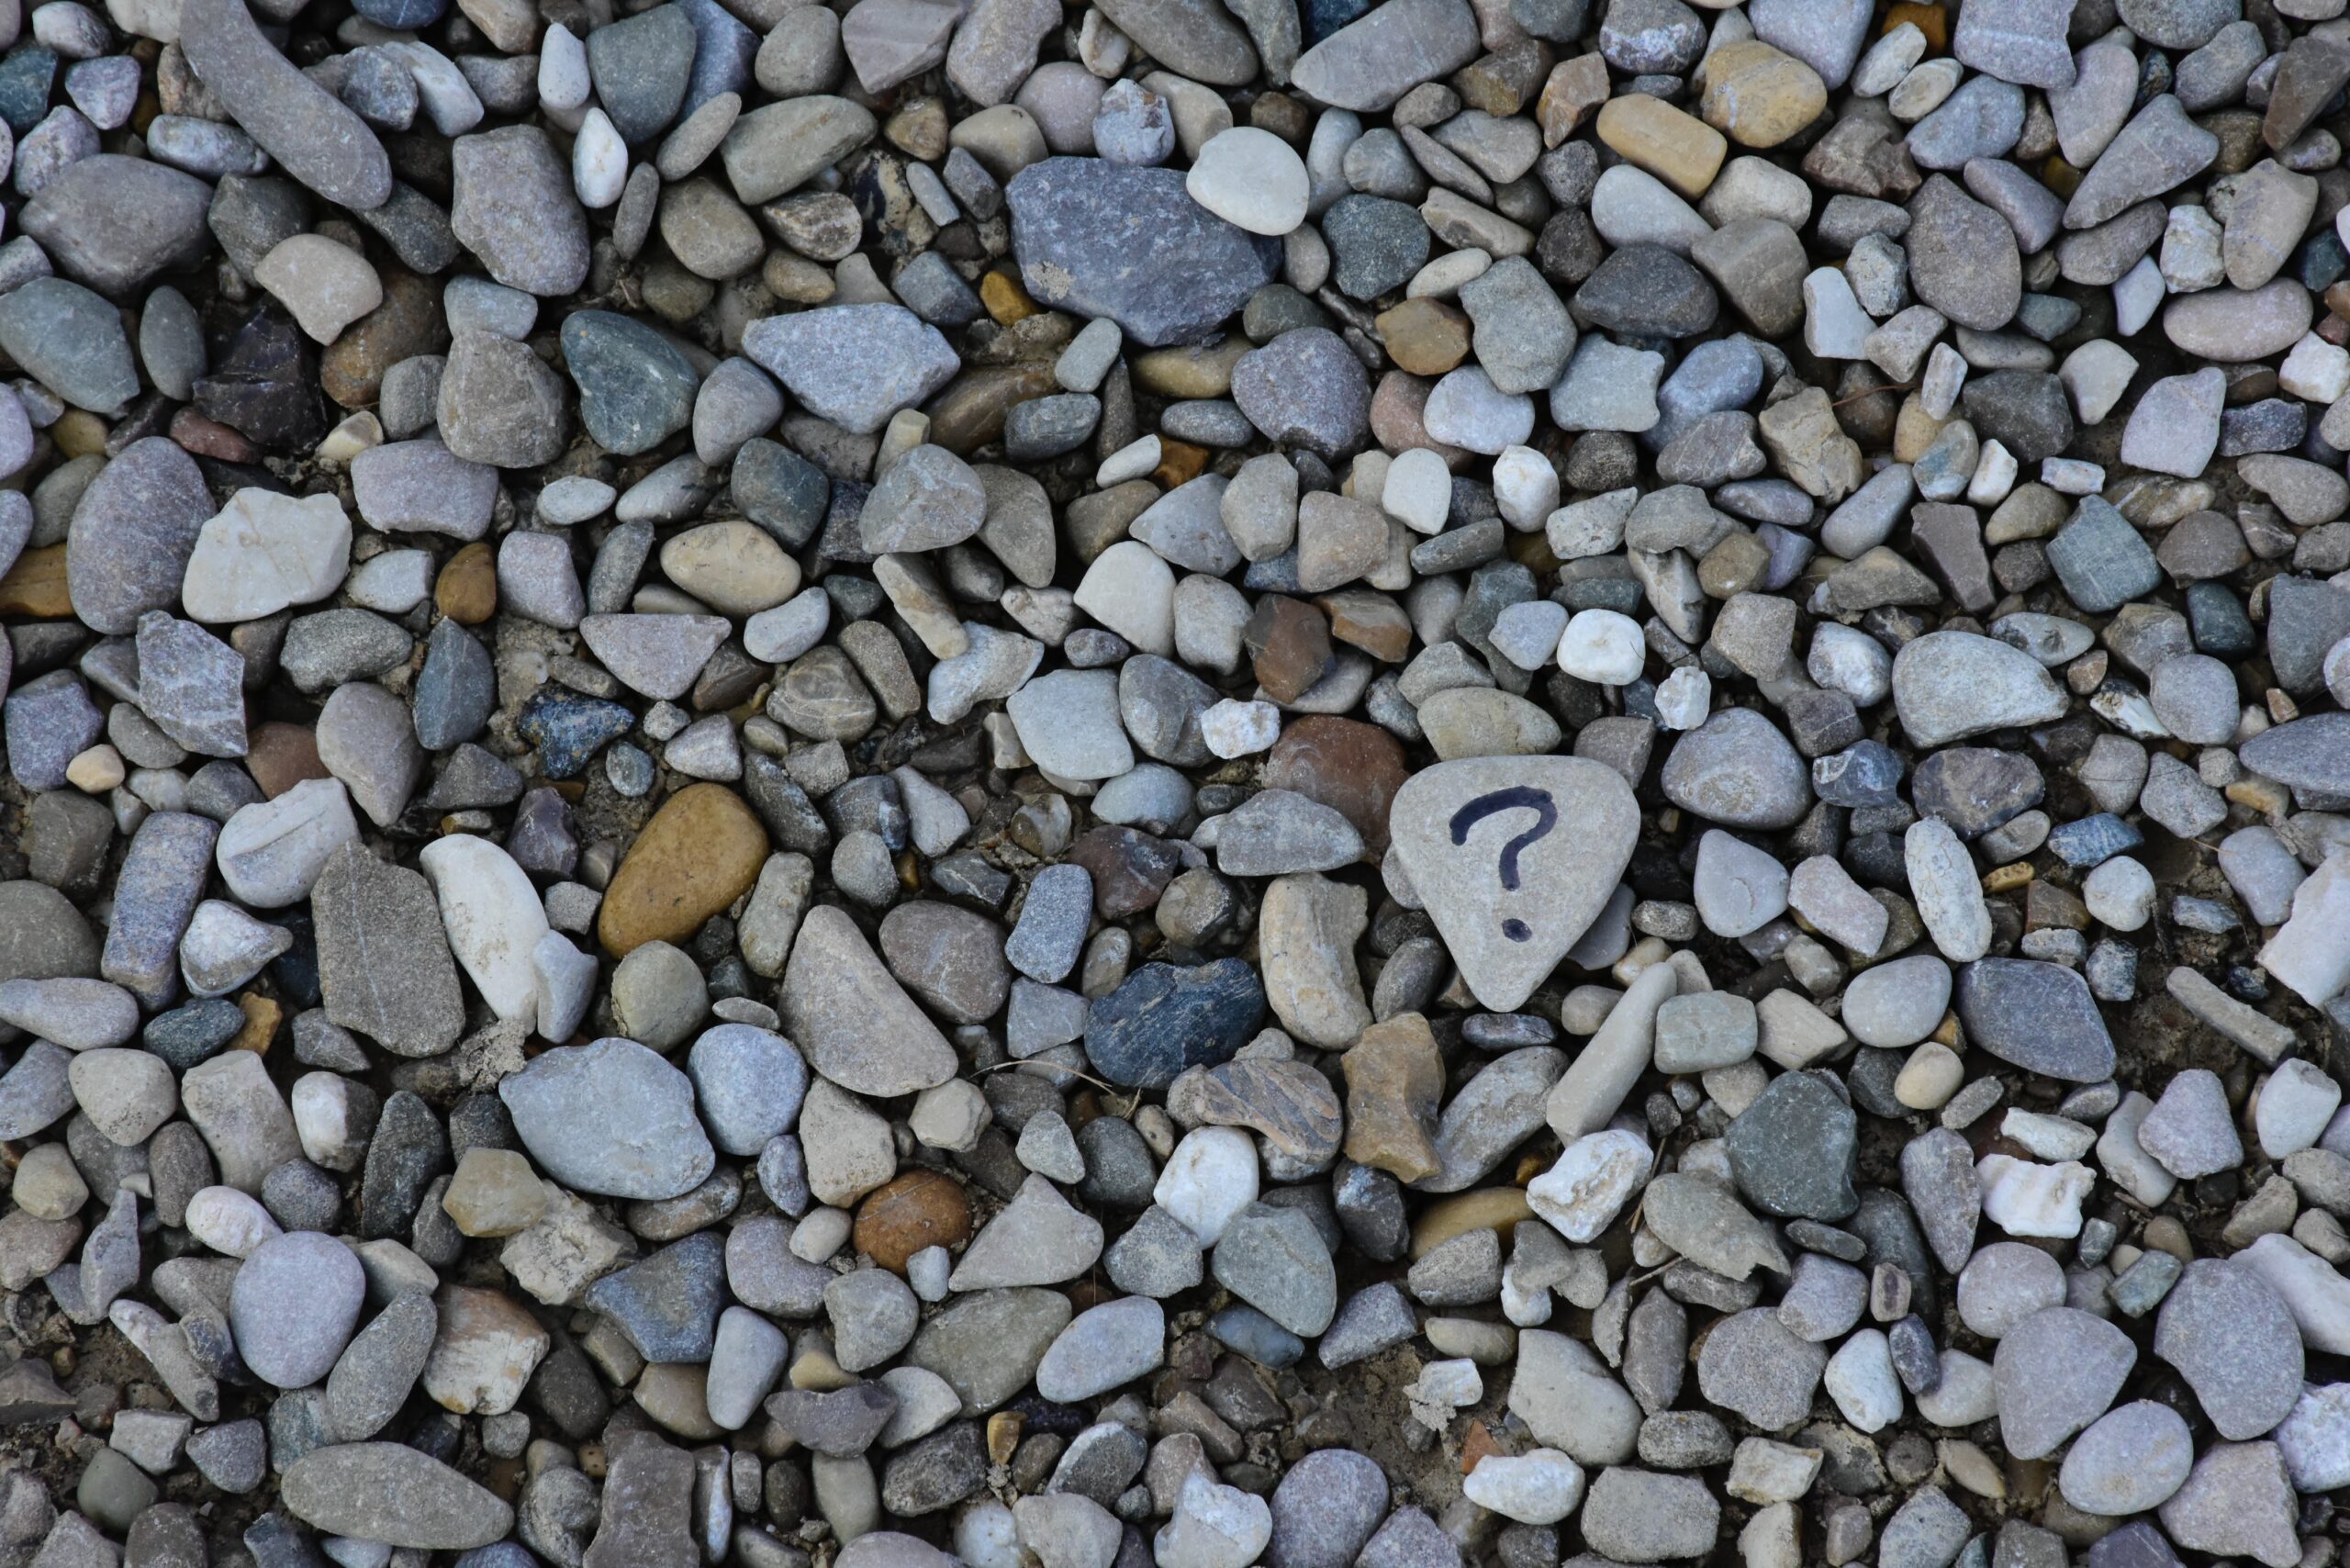 Many different stones, one with a question mark